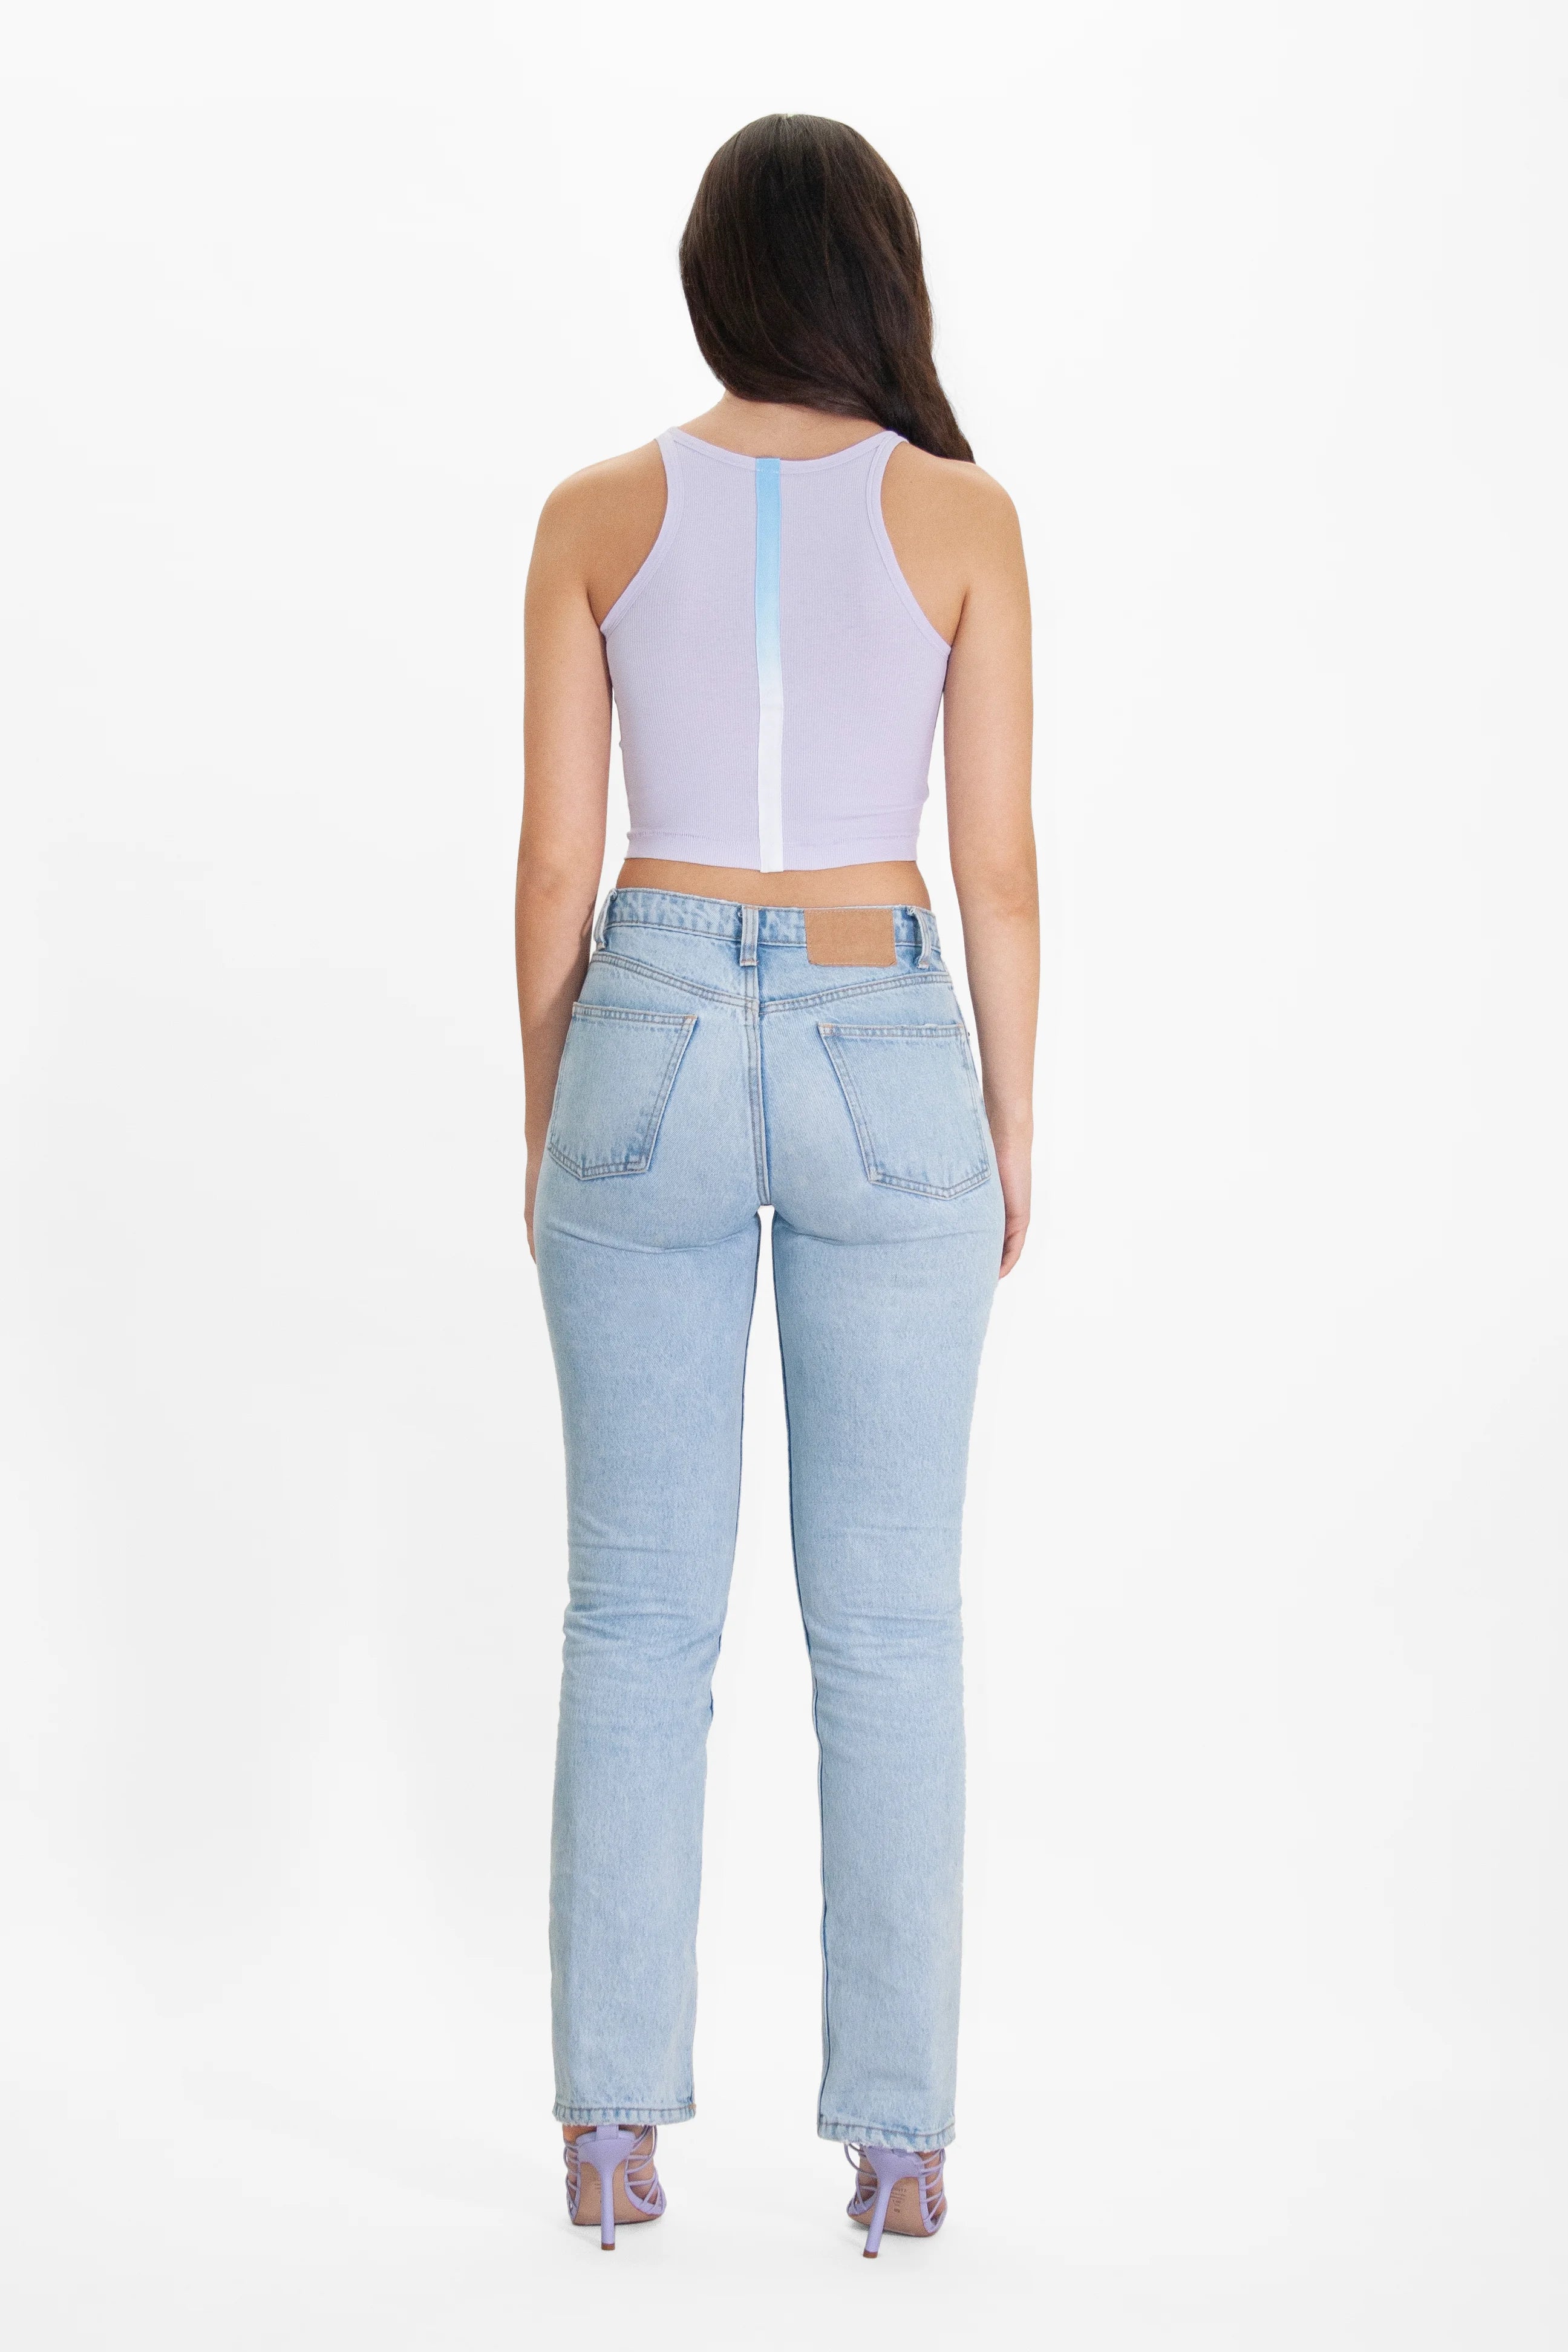 The back view of a woman wearing Angel Number 222 Cropped Tank in Nebula by GFLApparel jeans and a crop top.